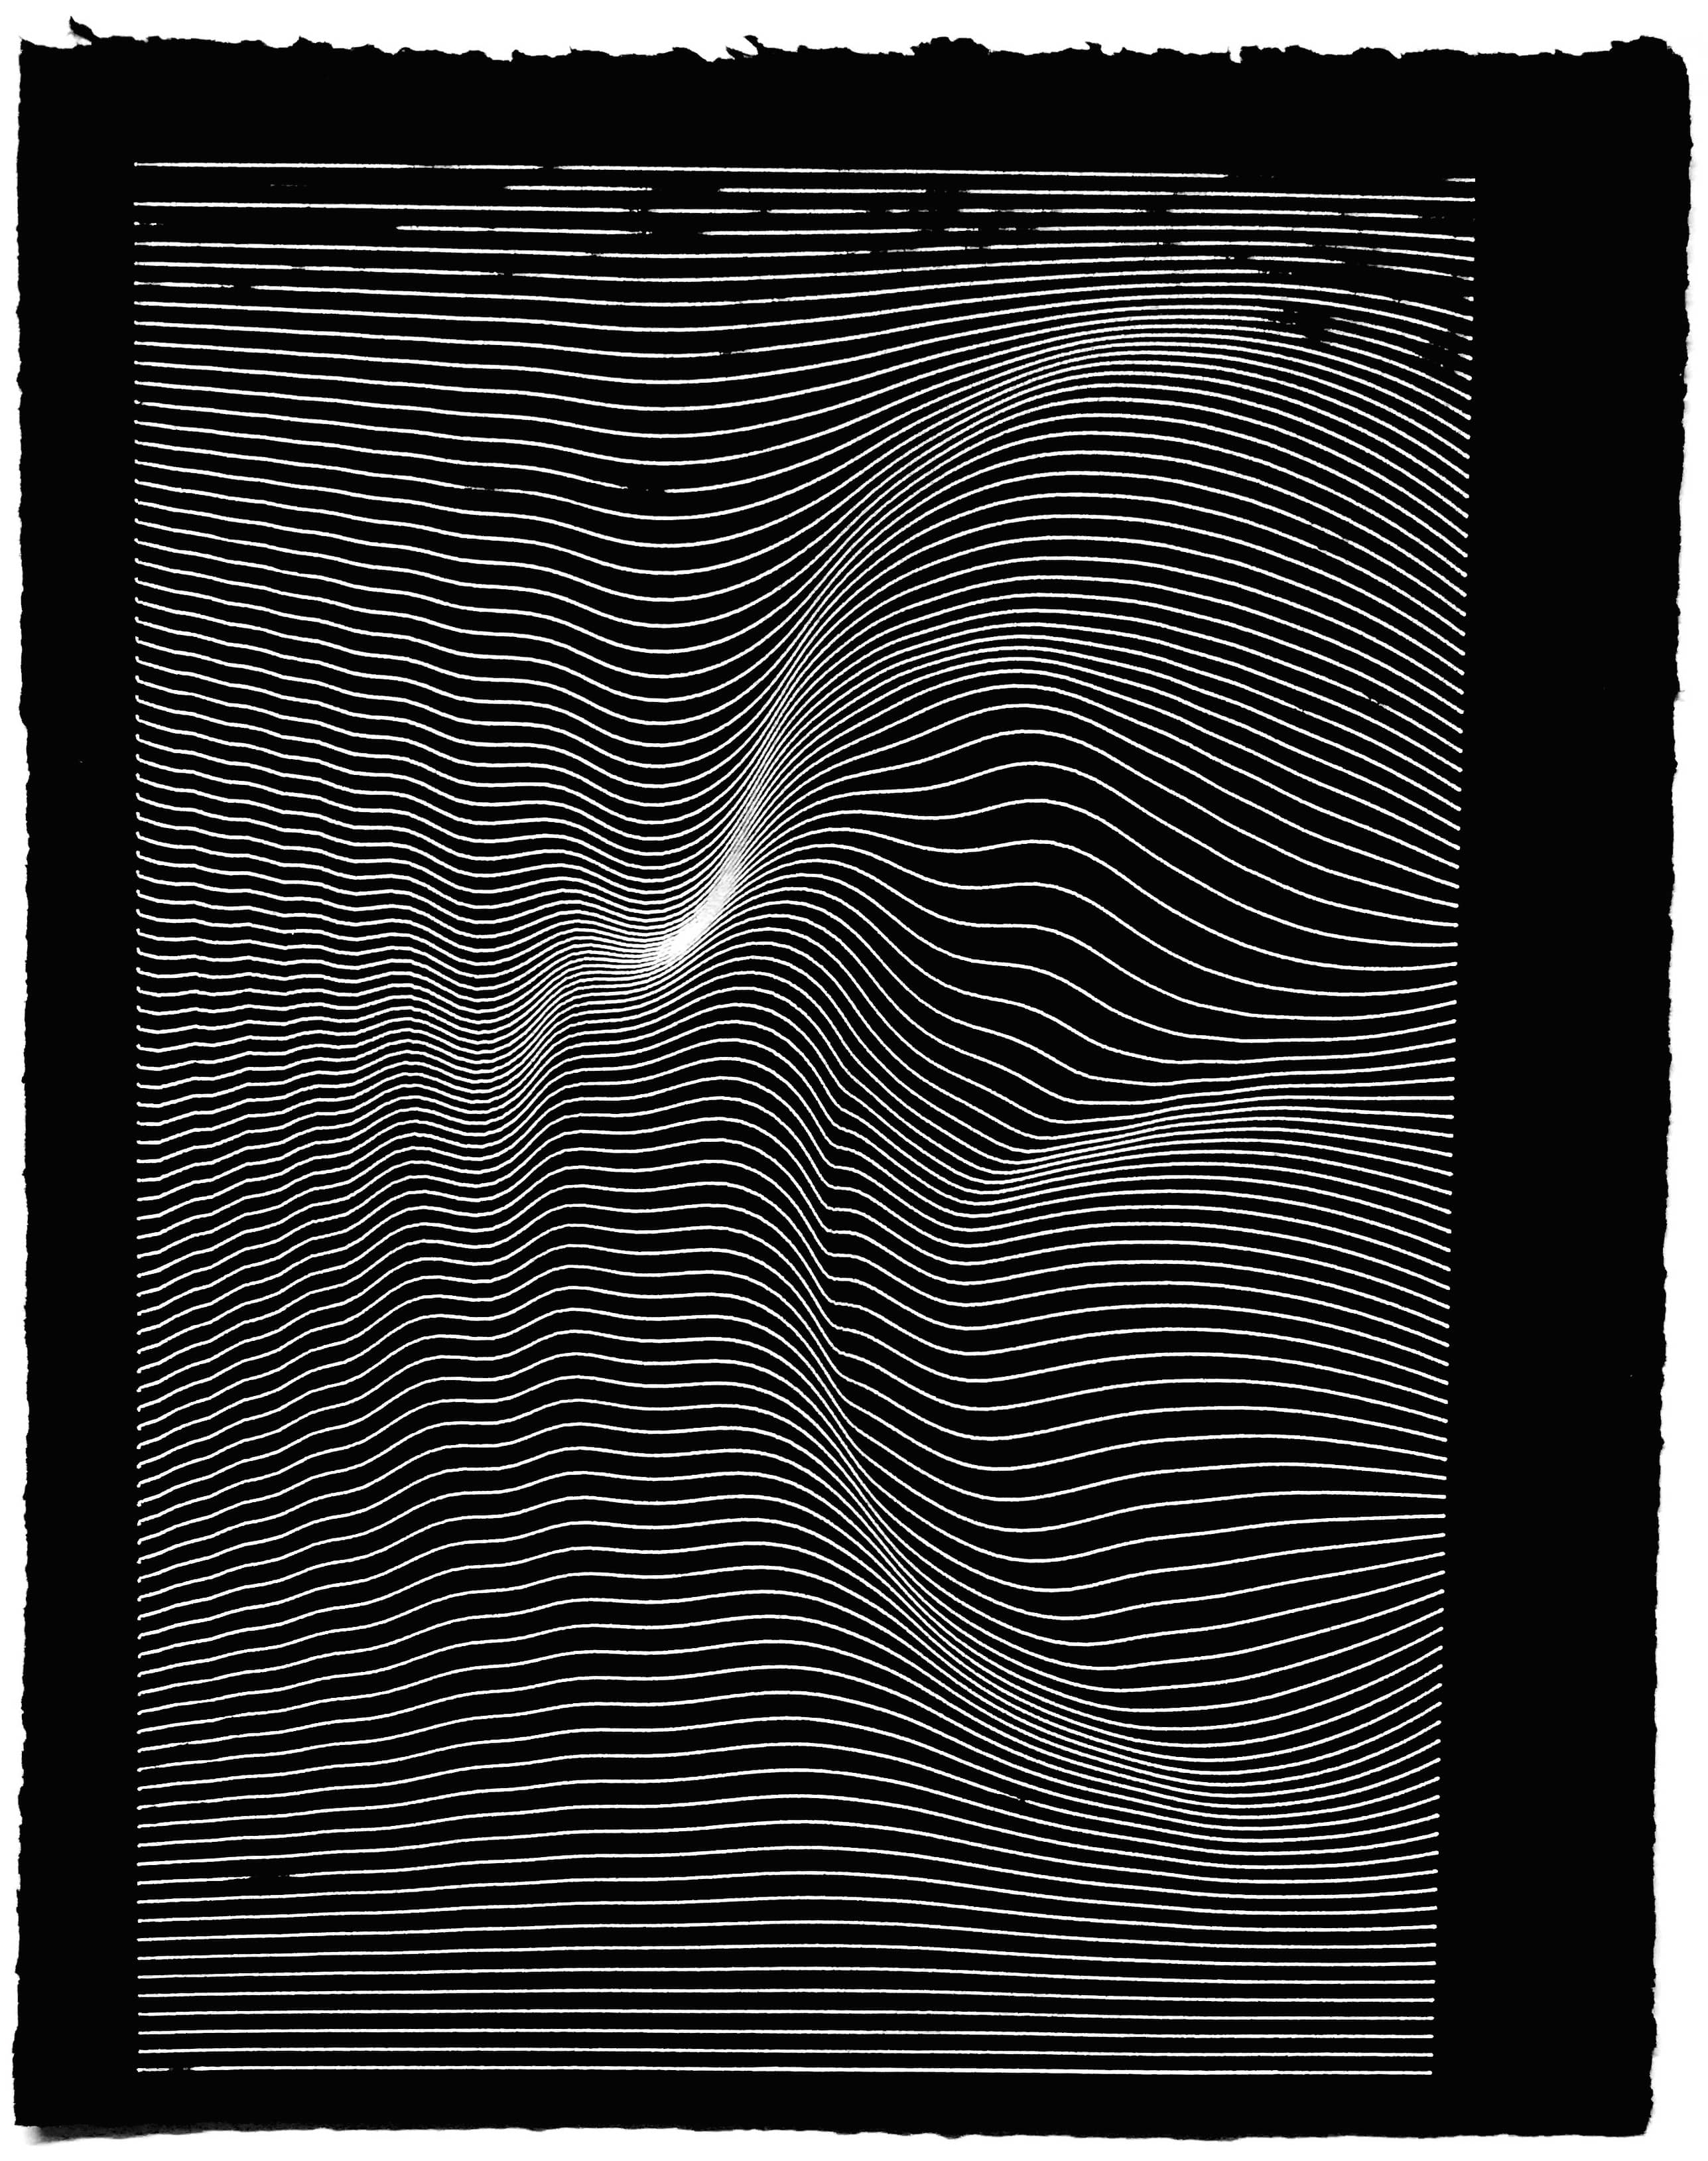 A drawing of a sine wave lerp plotted on black paper using an AxiDraw V3 and a white gel pen.